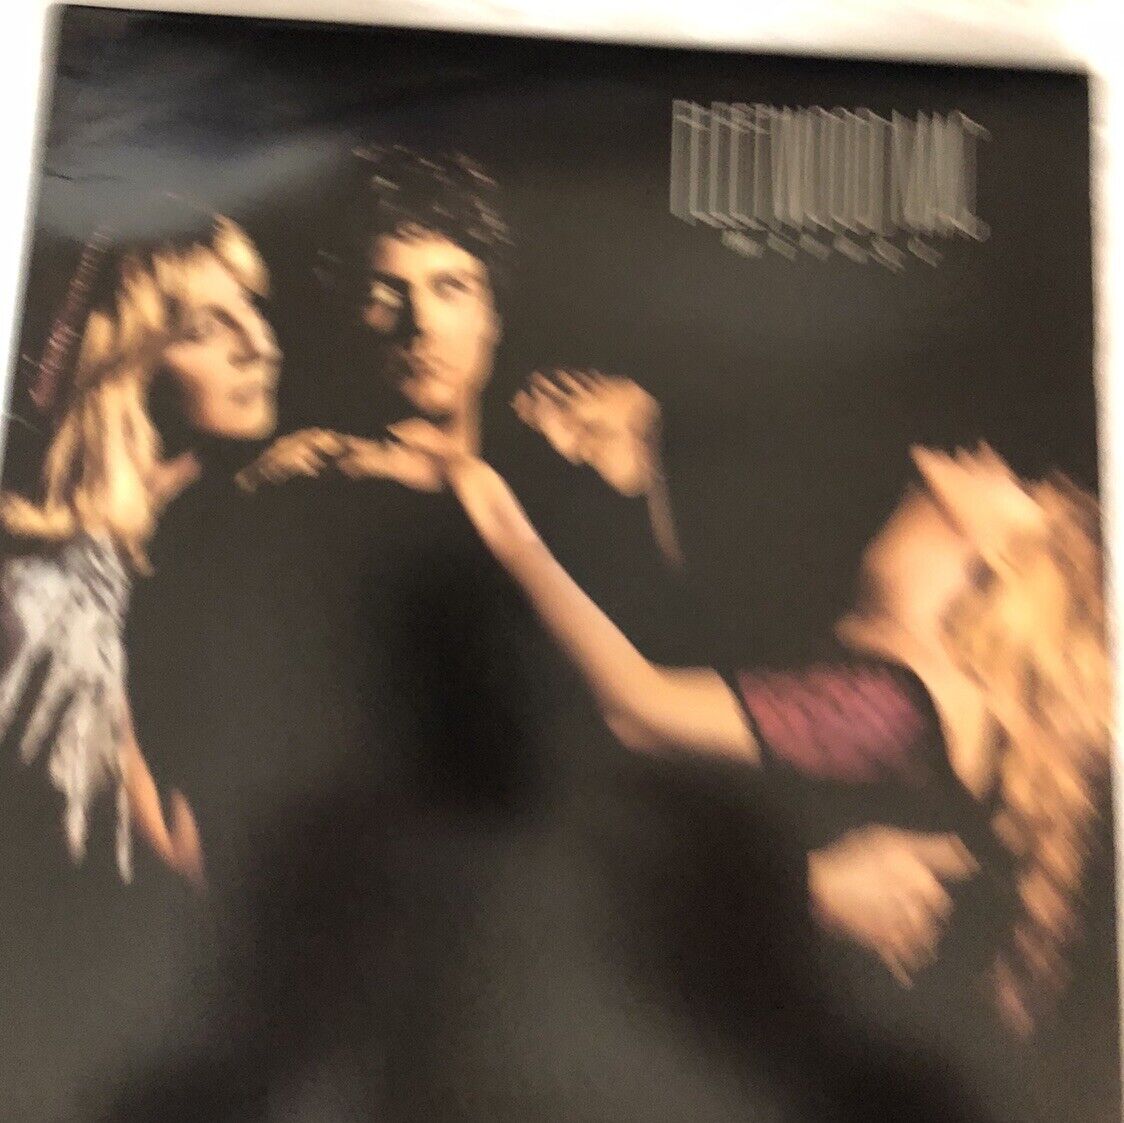 Mirage by Fleetwood Mac (Record, 1982). 1-23607